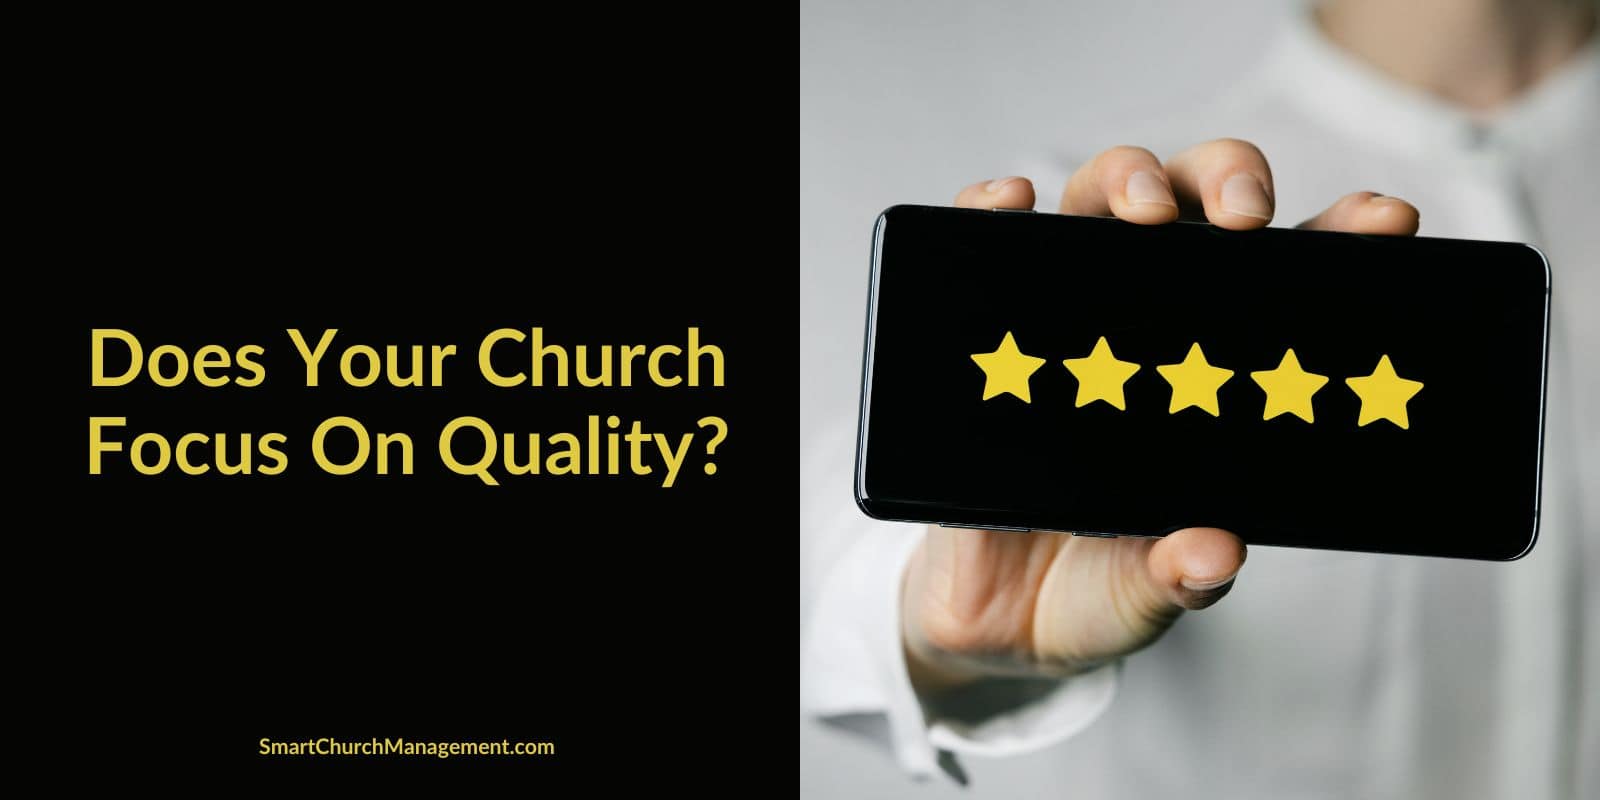 should churches focus on quality?